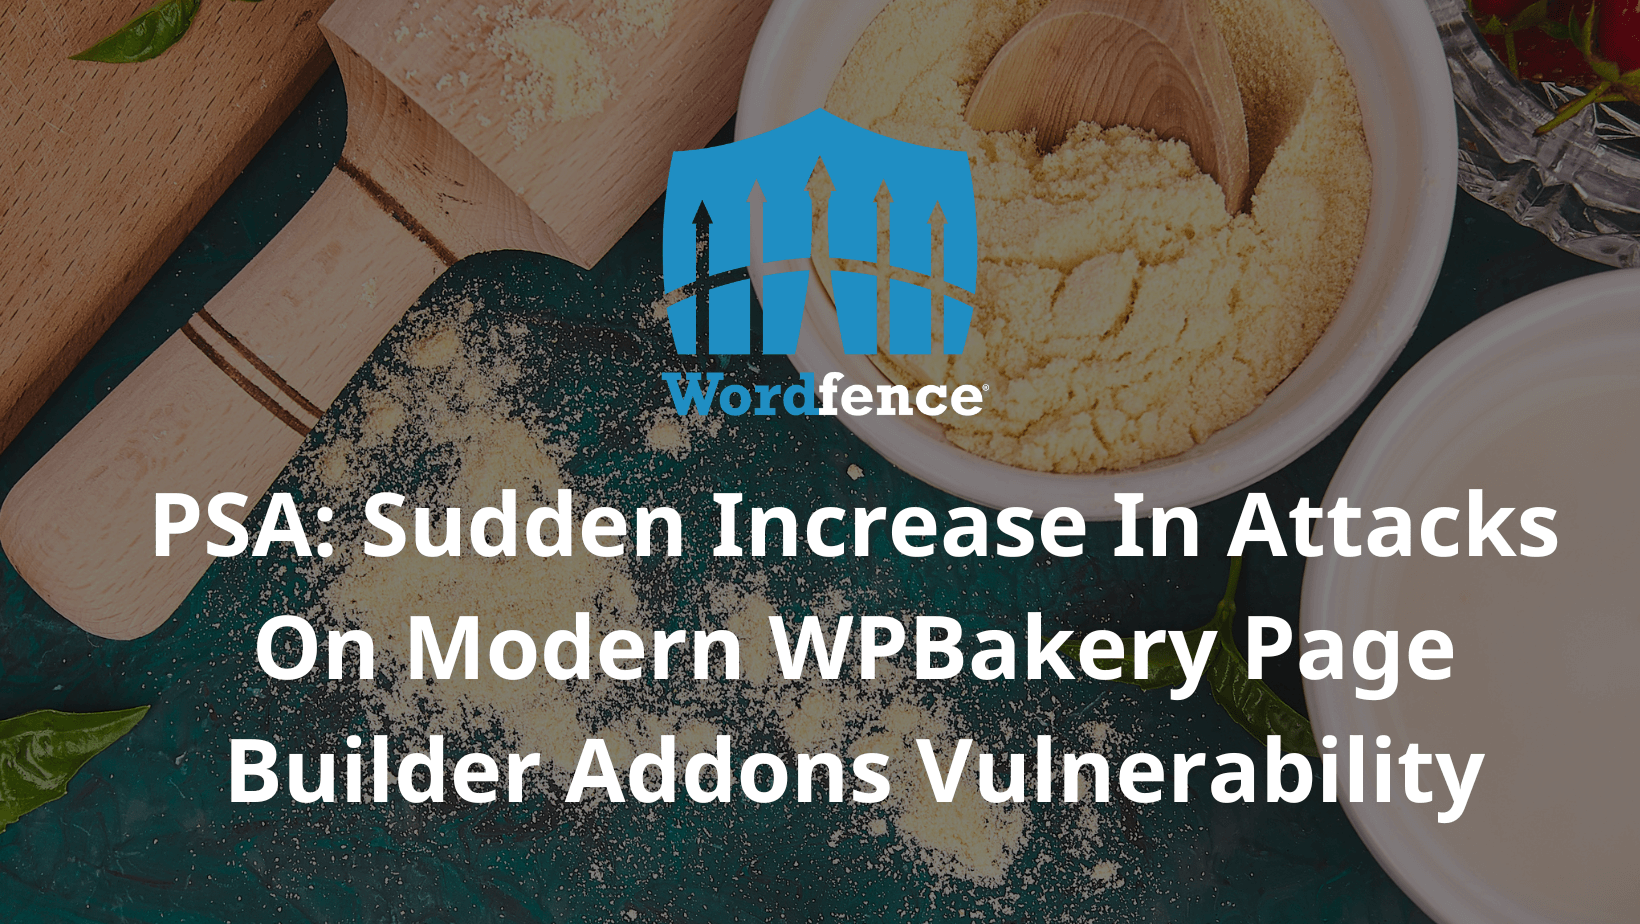 PSA Sudden Increase In Attacks On Modern WPBakery Page Builder Addons Vulnerability